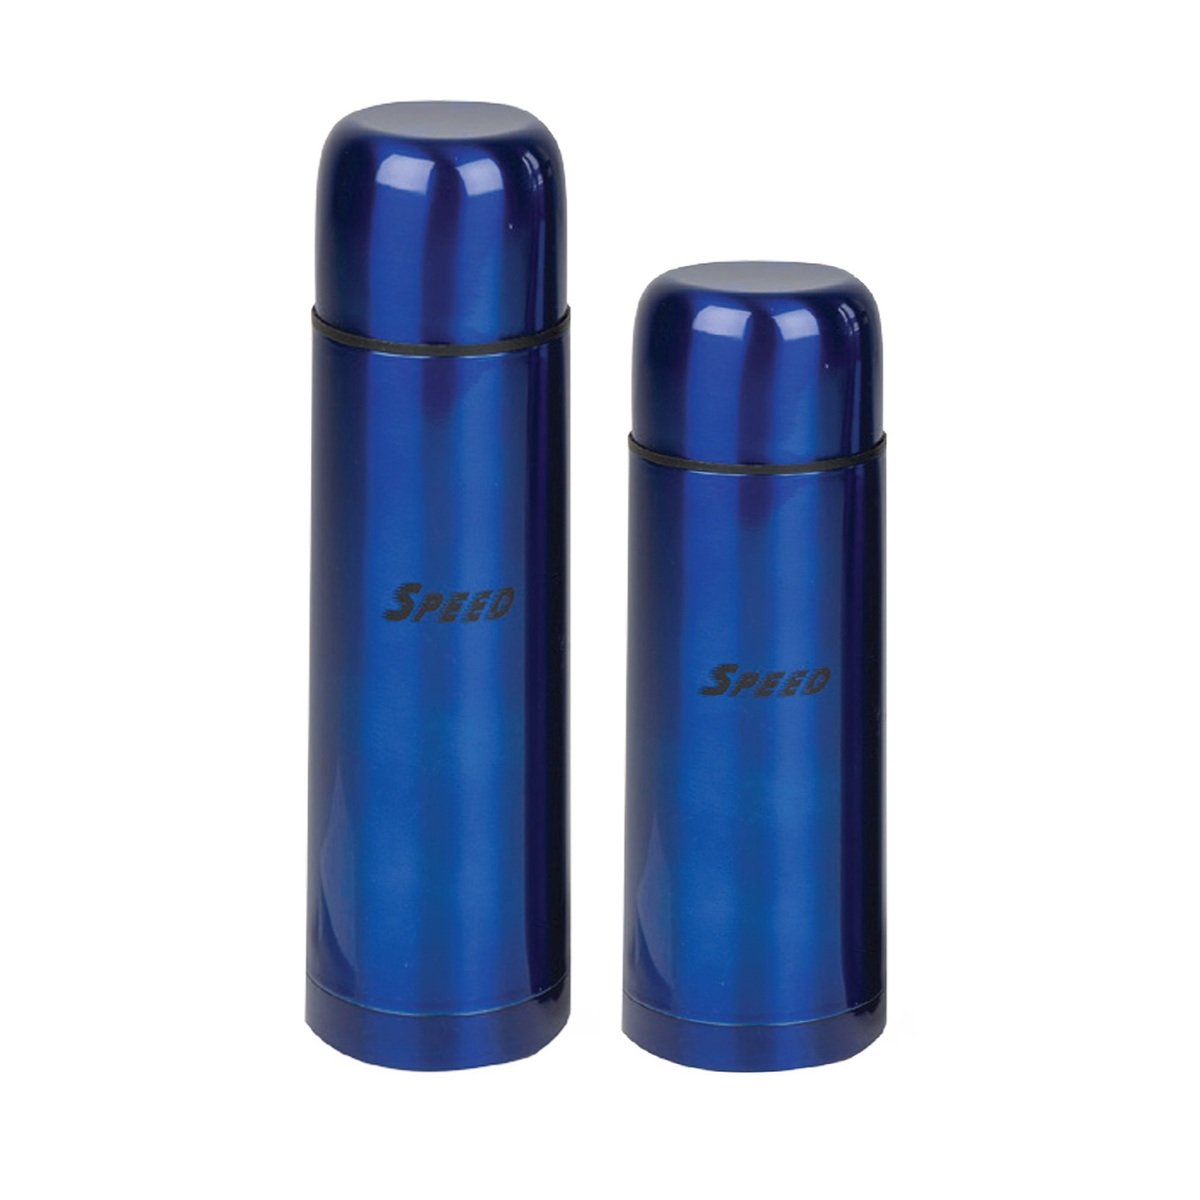 Speed Stainless Steel Flask 750ml + 1Ltr KEW2 Assorted Colors